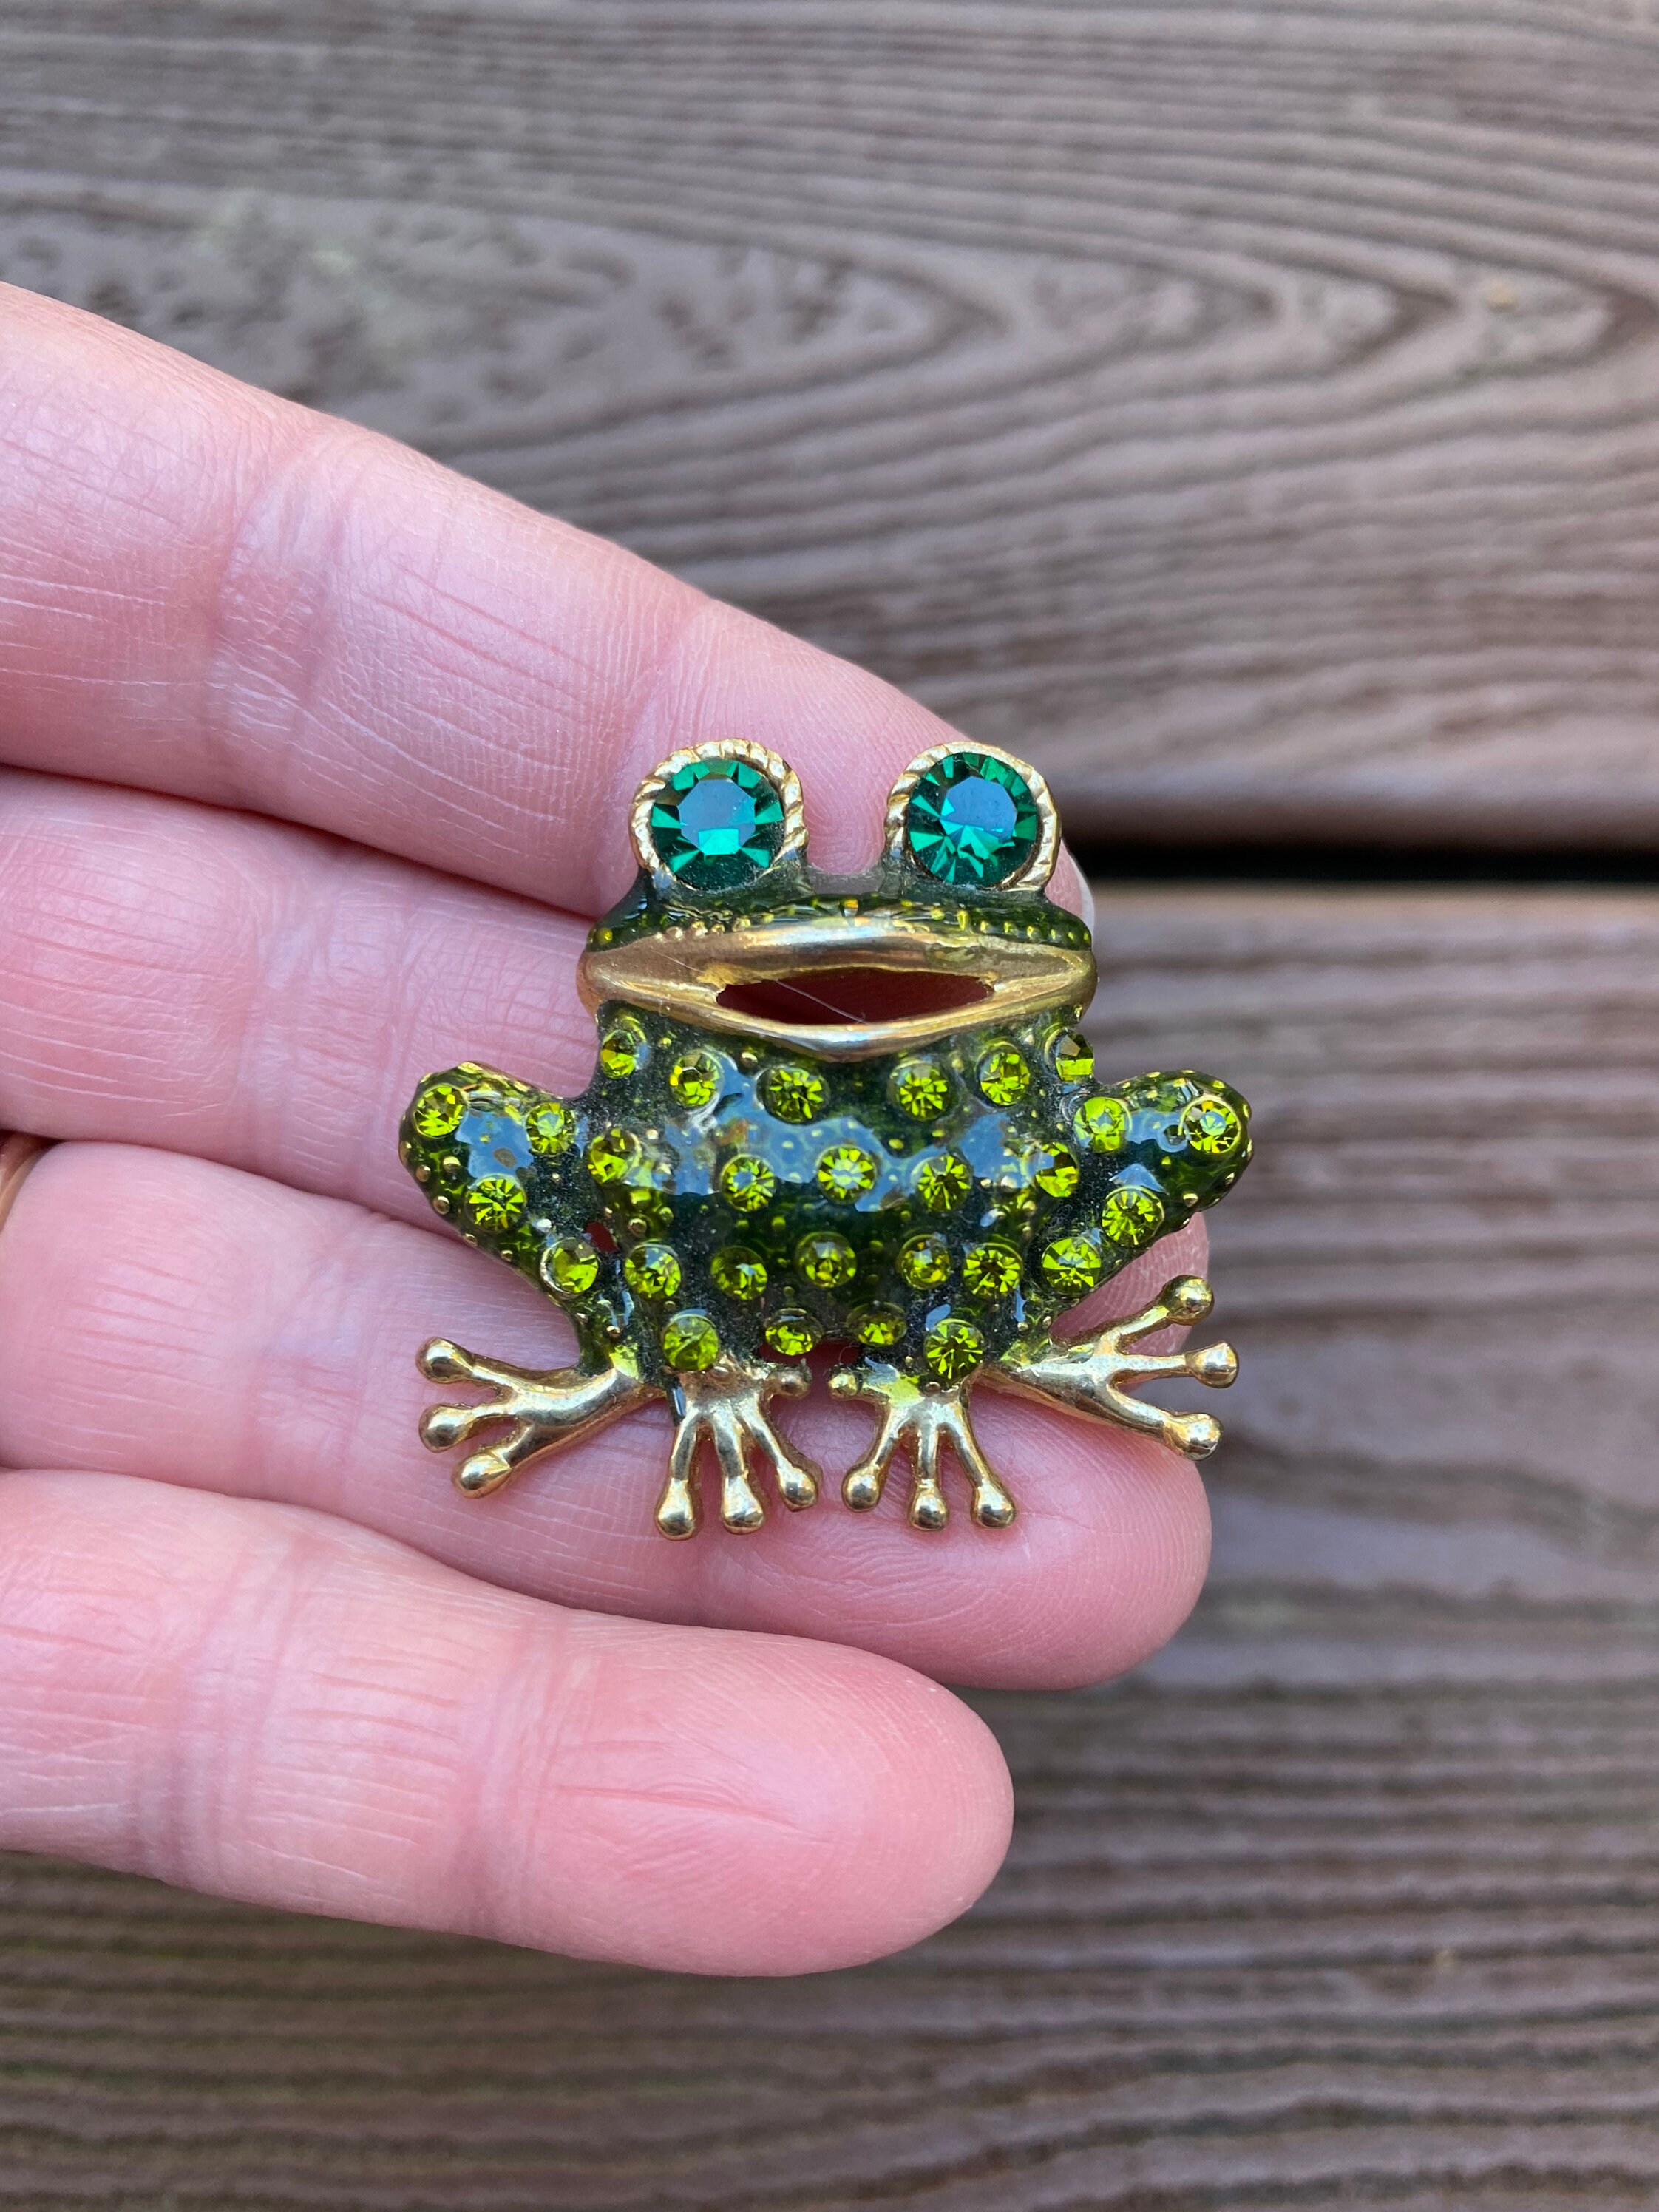 Vintage Jewelry Adorable Enamel and Rhinestone Frog Pin Brooch